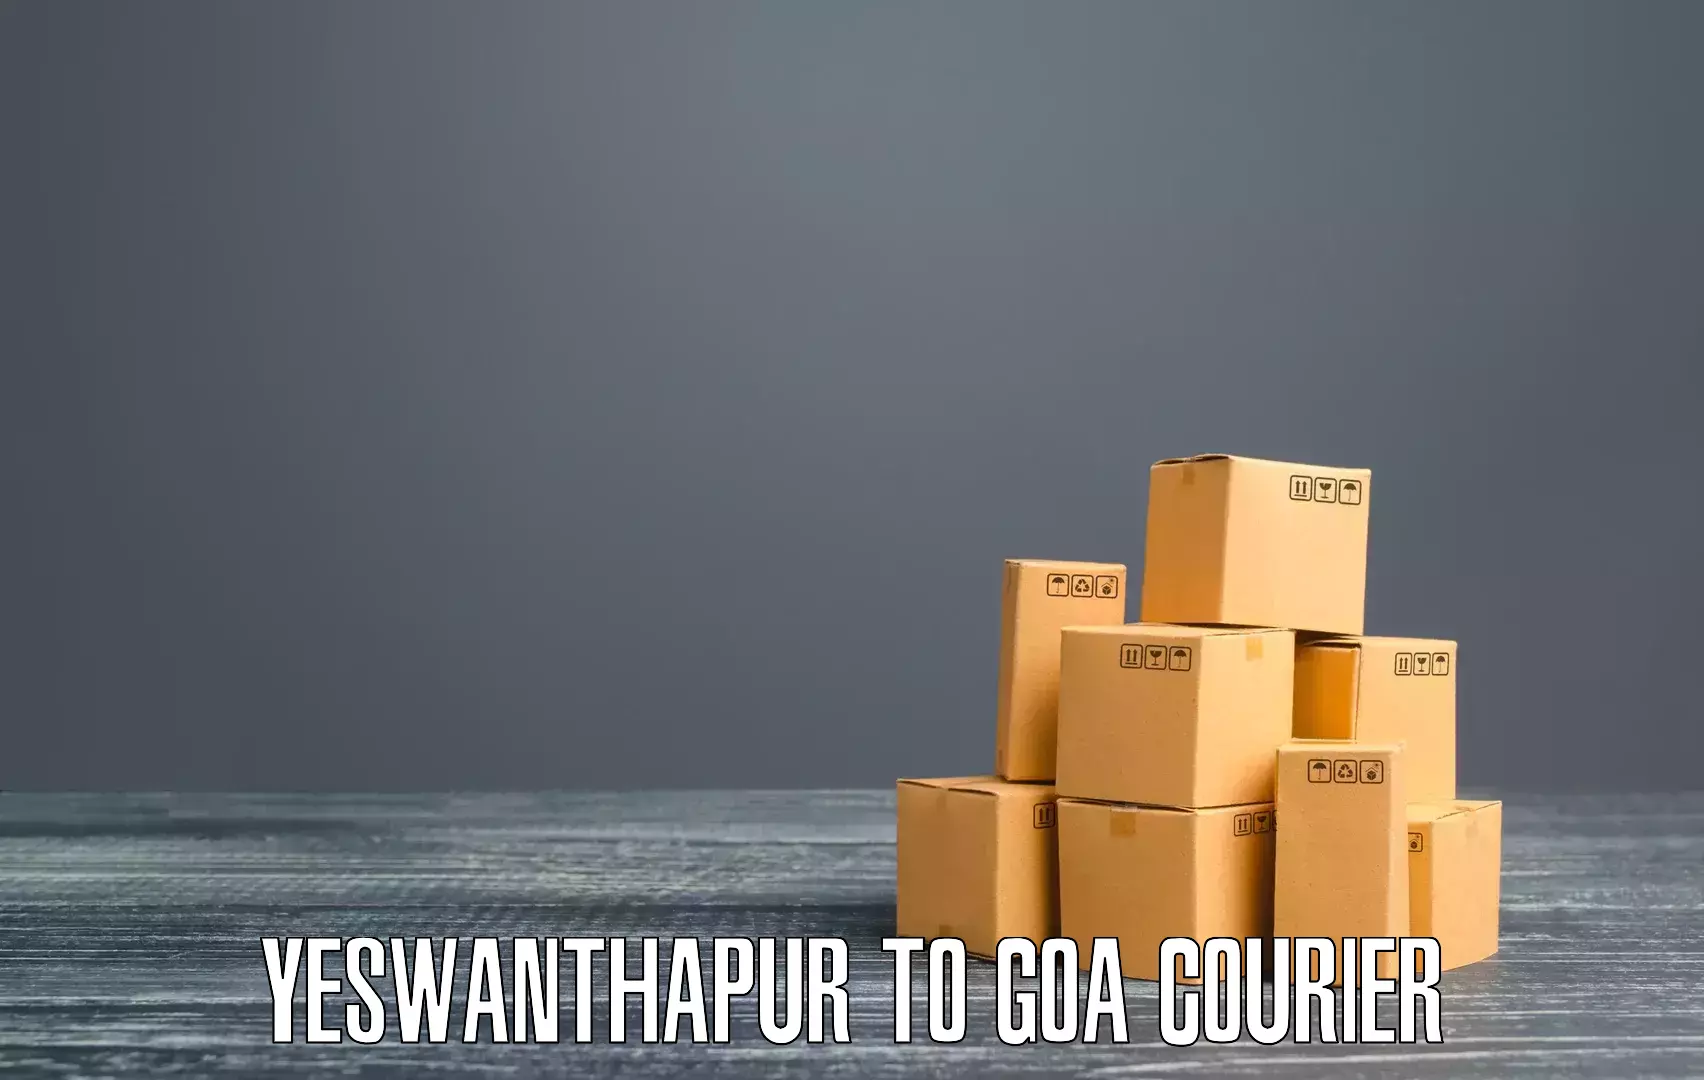 Express courier capabilities Yeswanthapur to Ponda